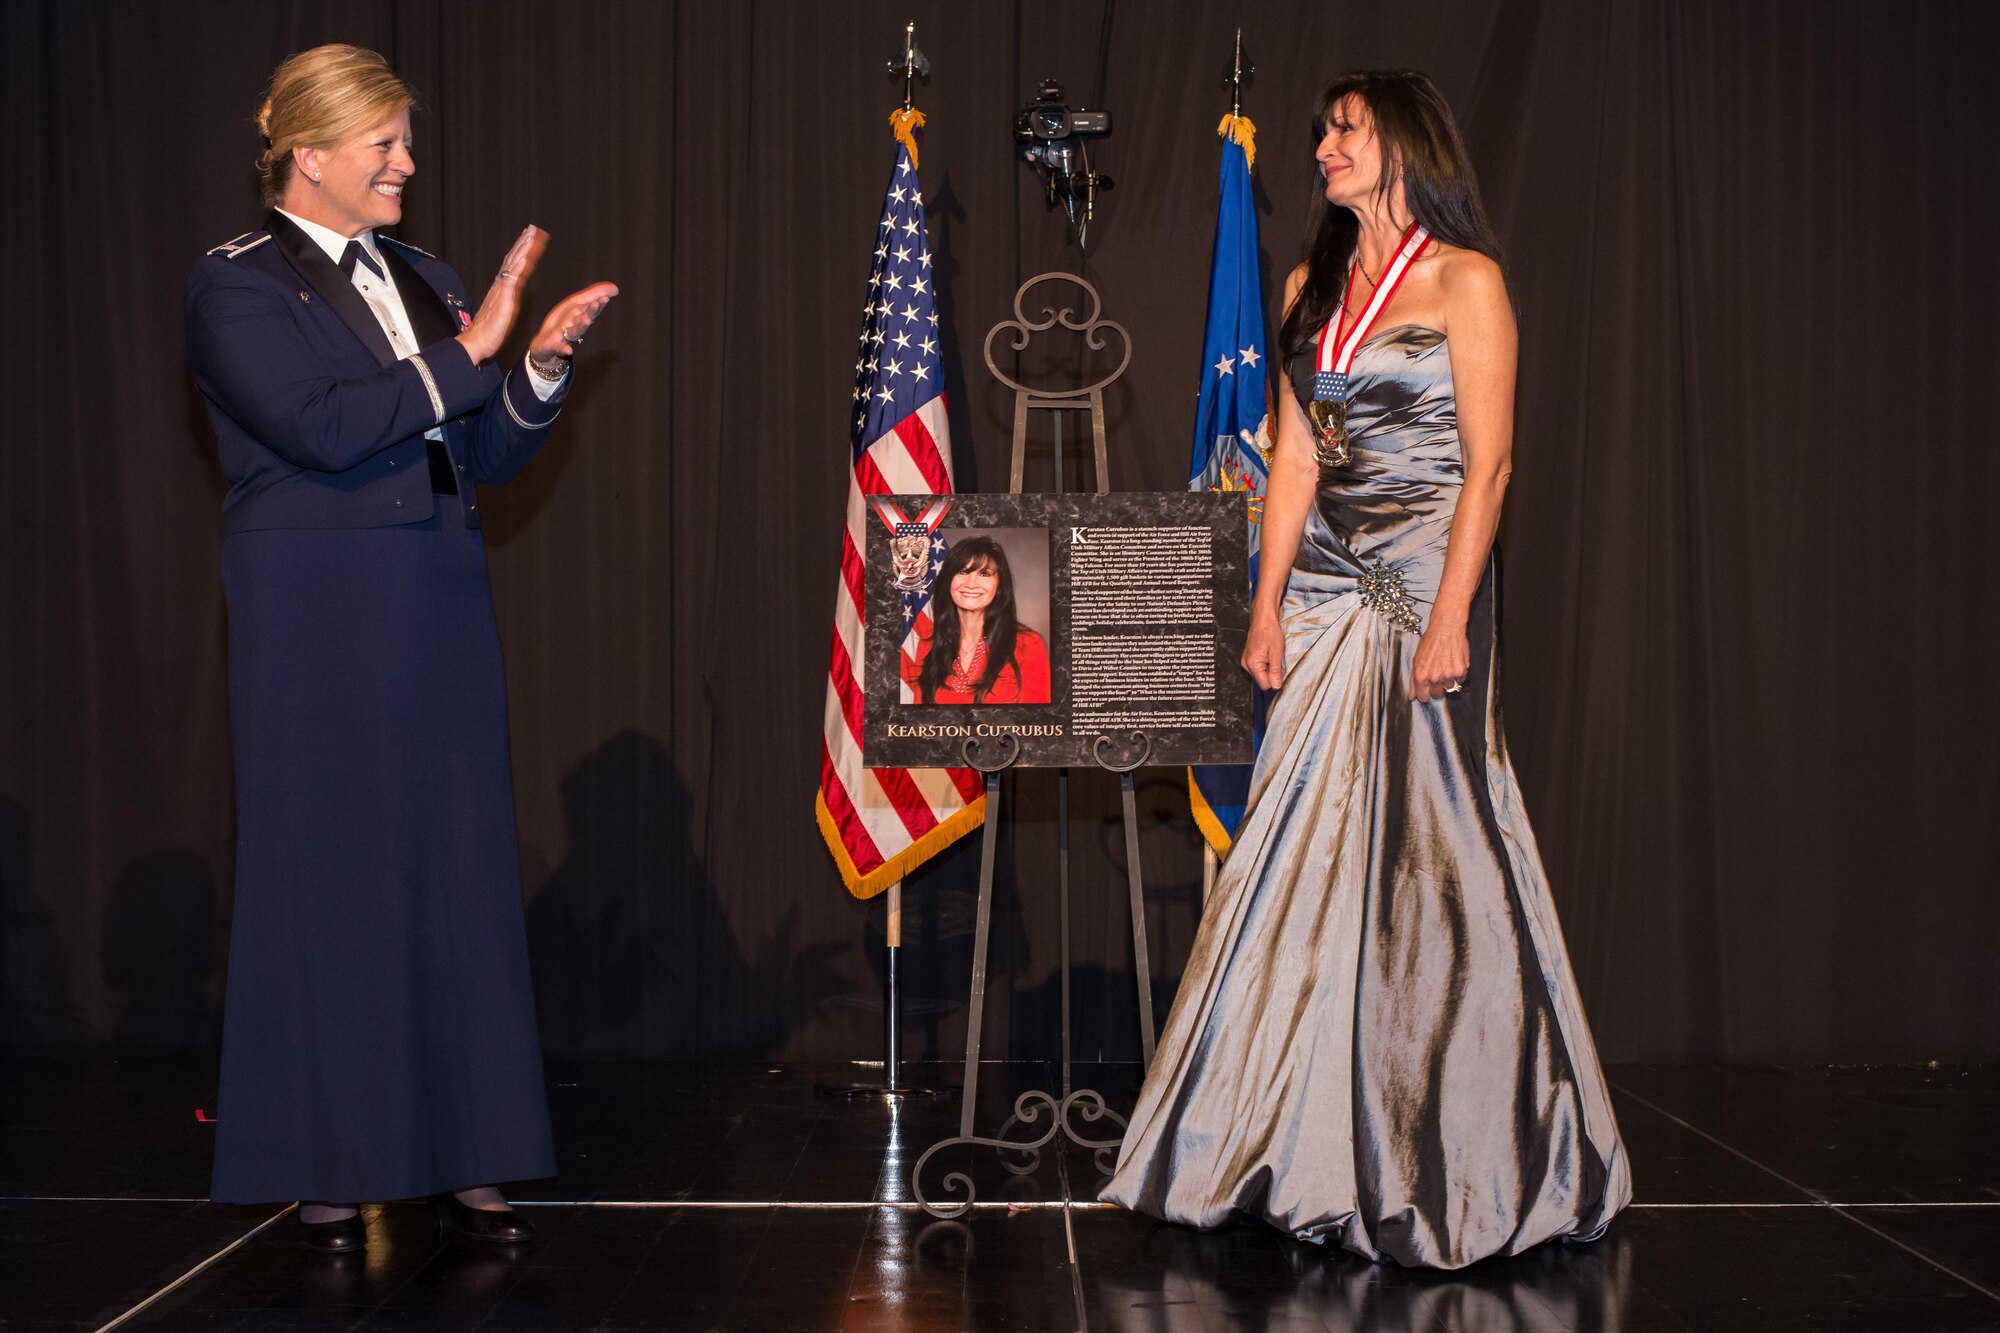 Kearston Cutrubus receives applause from 75th Air Base Wing Commander Col. Jennifer Hammerstedt during the 2016 Air Force Ball at the Davis Convention Center, Layton, Utah, Sept. 16, 2016. Cutrubus received the Community Wingman Award during the event for her staunch support of the Air Force and Hill Air Force Base. (U.S. Air Force photo by R. Nial Bradshaw)